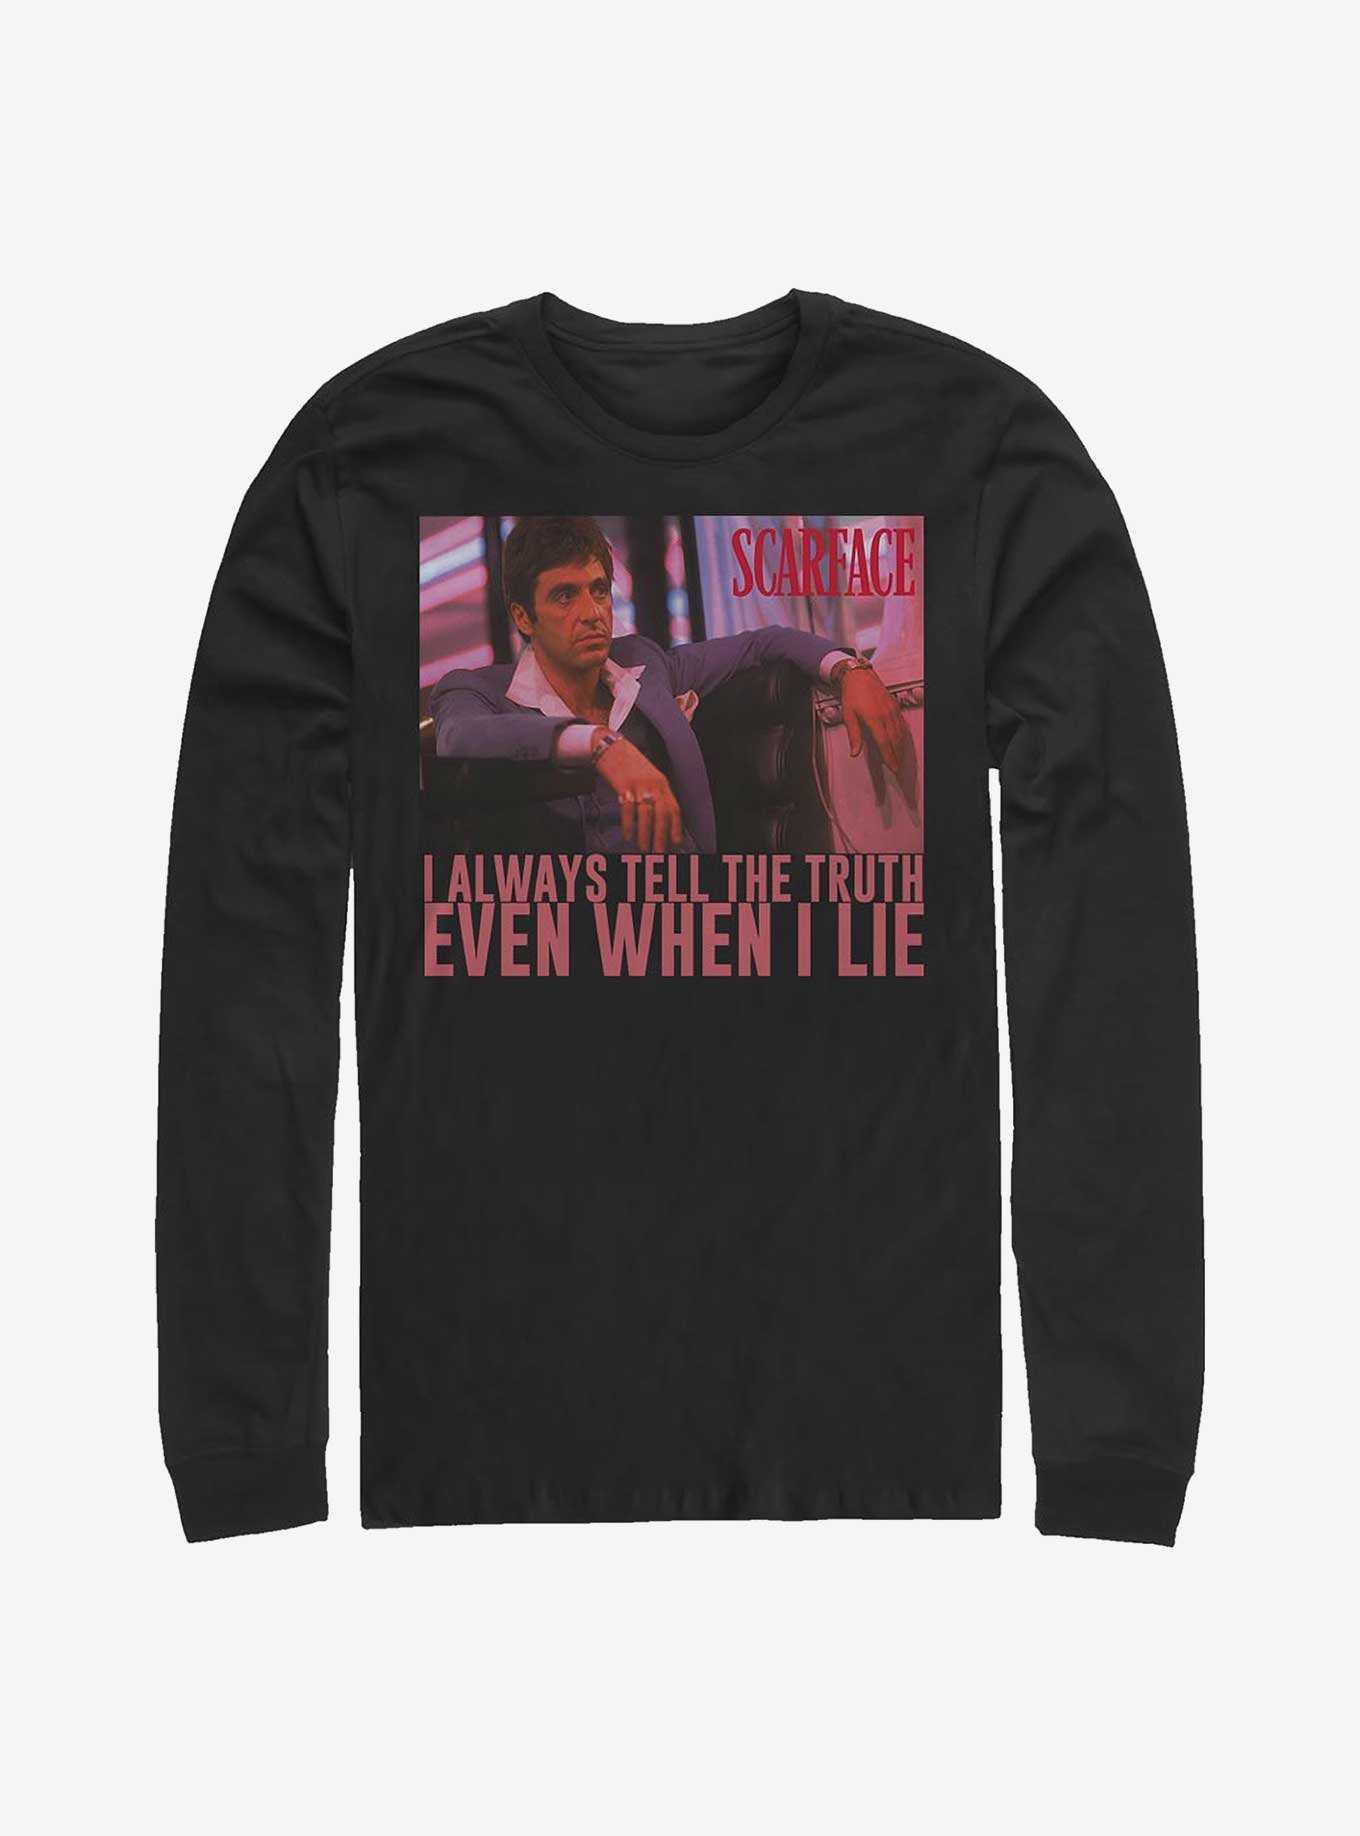 Scarface Always Tell The Truth Even When I Lie Long-Sleeve T-Shirt, , hi-res